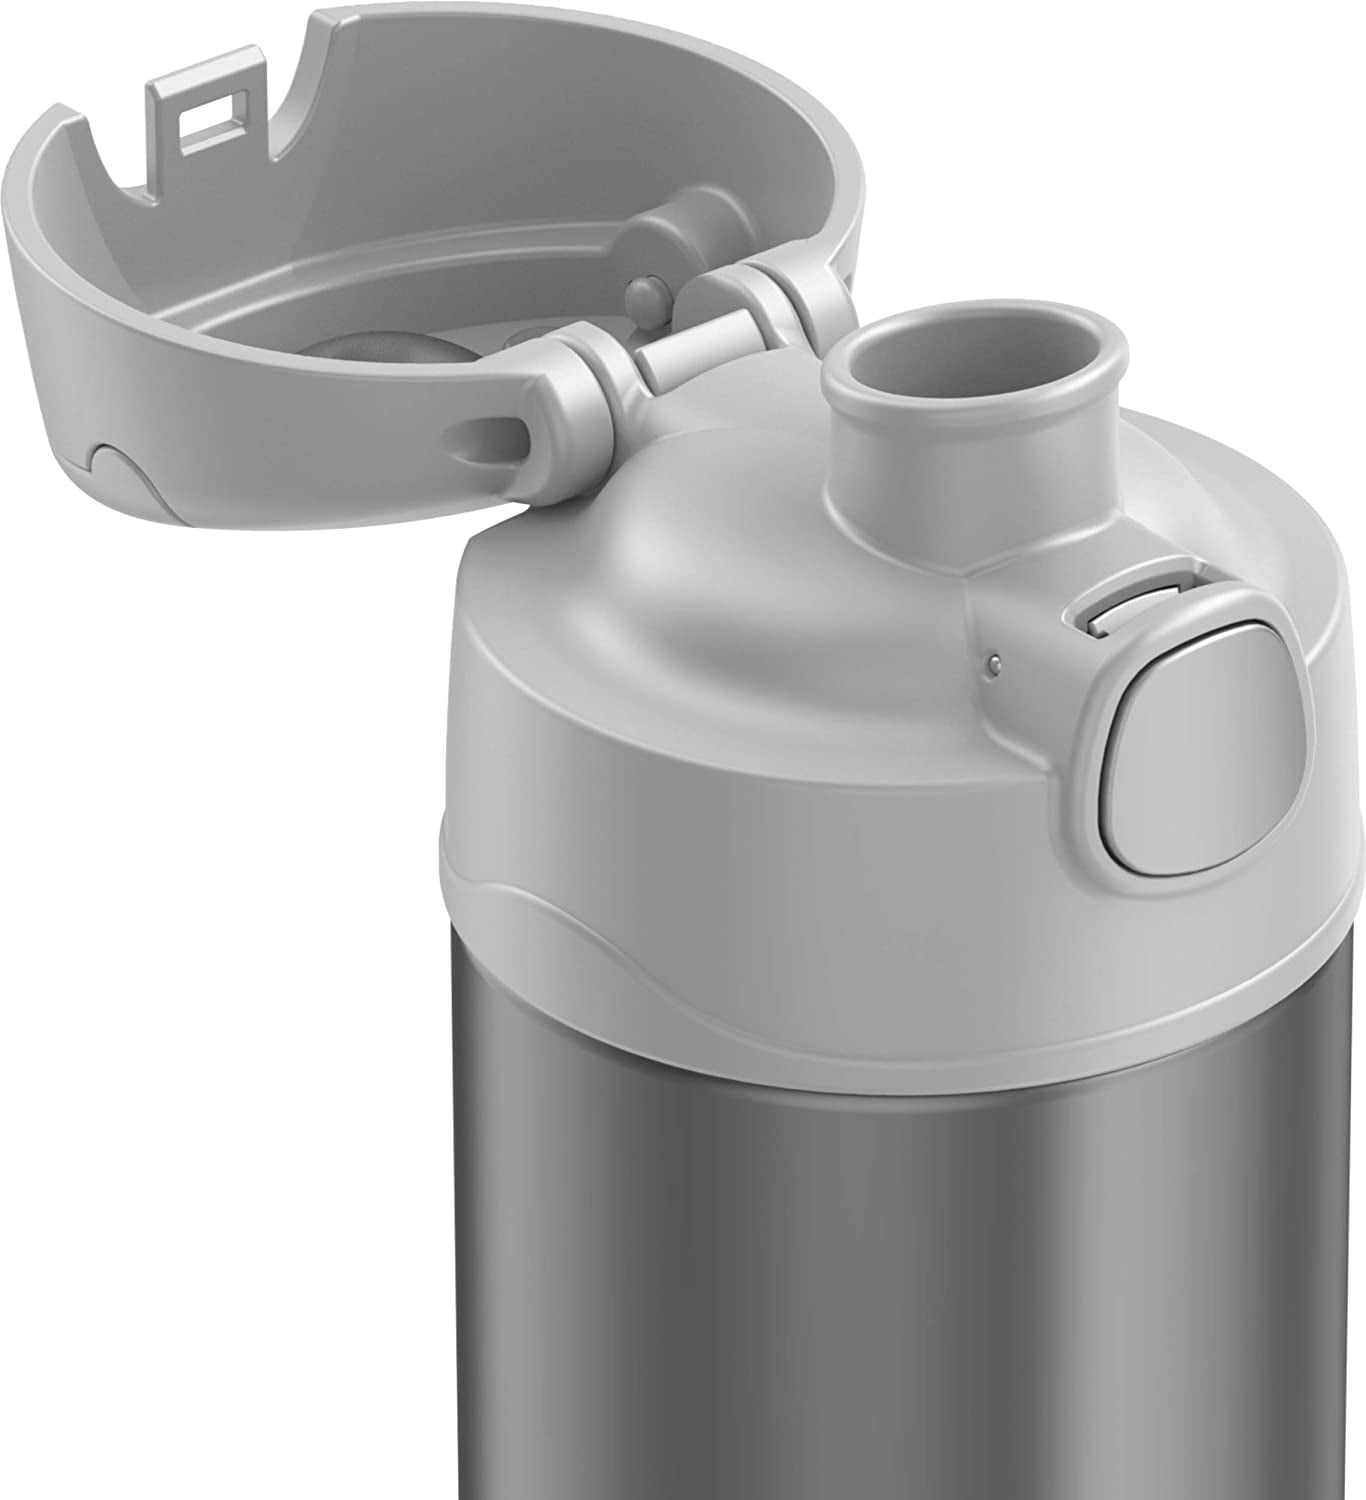 Thermos 16 Oz. Kid's Funtainer Stainless Steel Vacuum Insulated